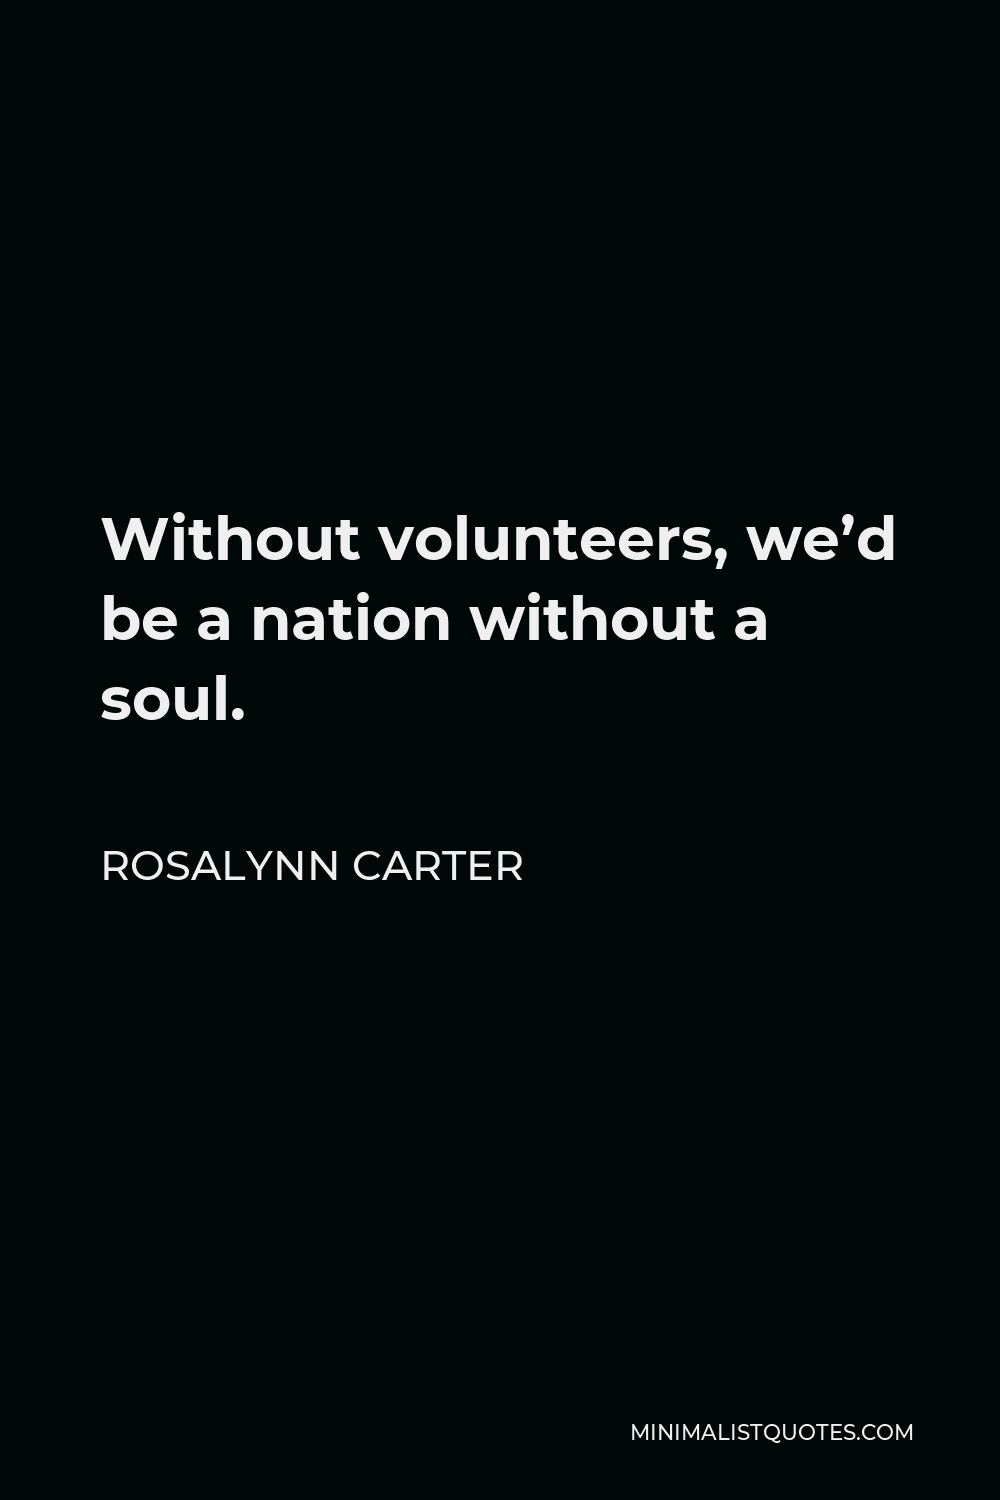 Rosalynn Carter Quote - Without volunteers, we’d be a nation without a soul.